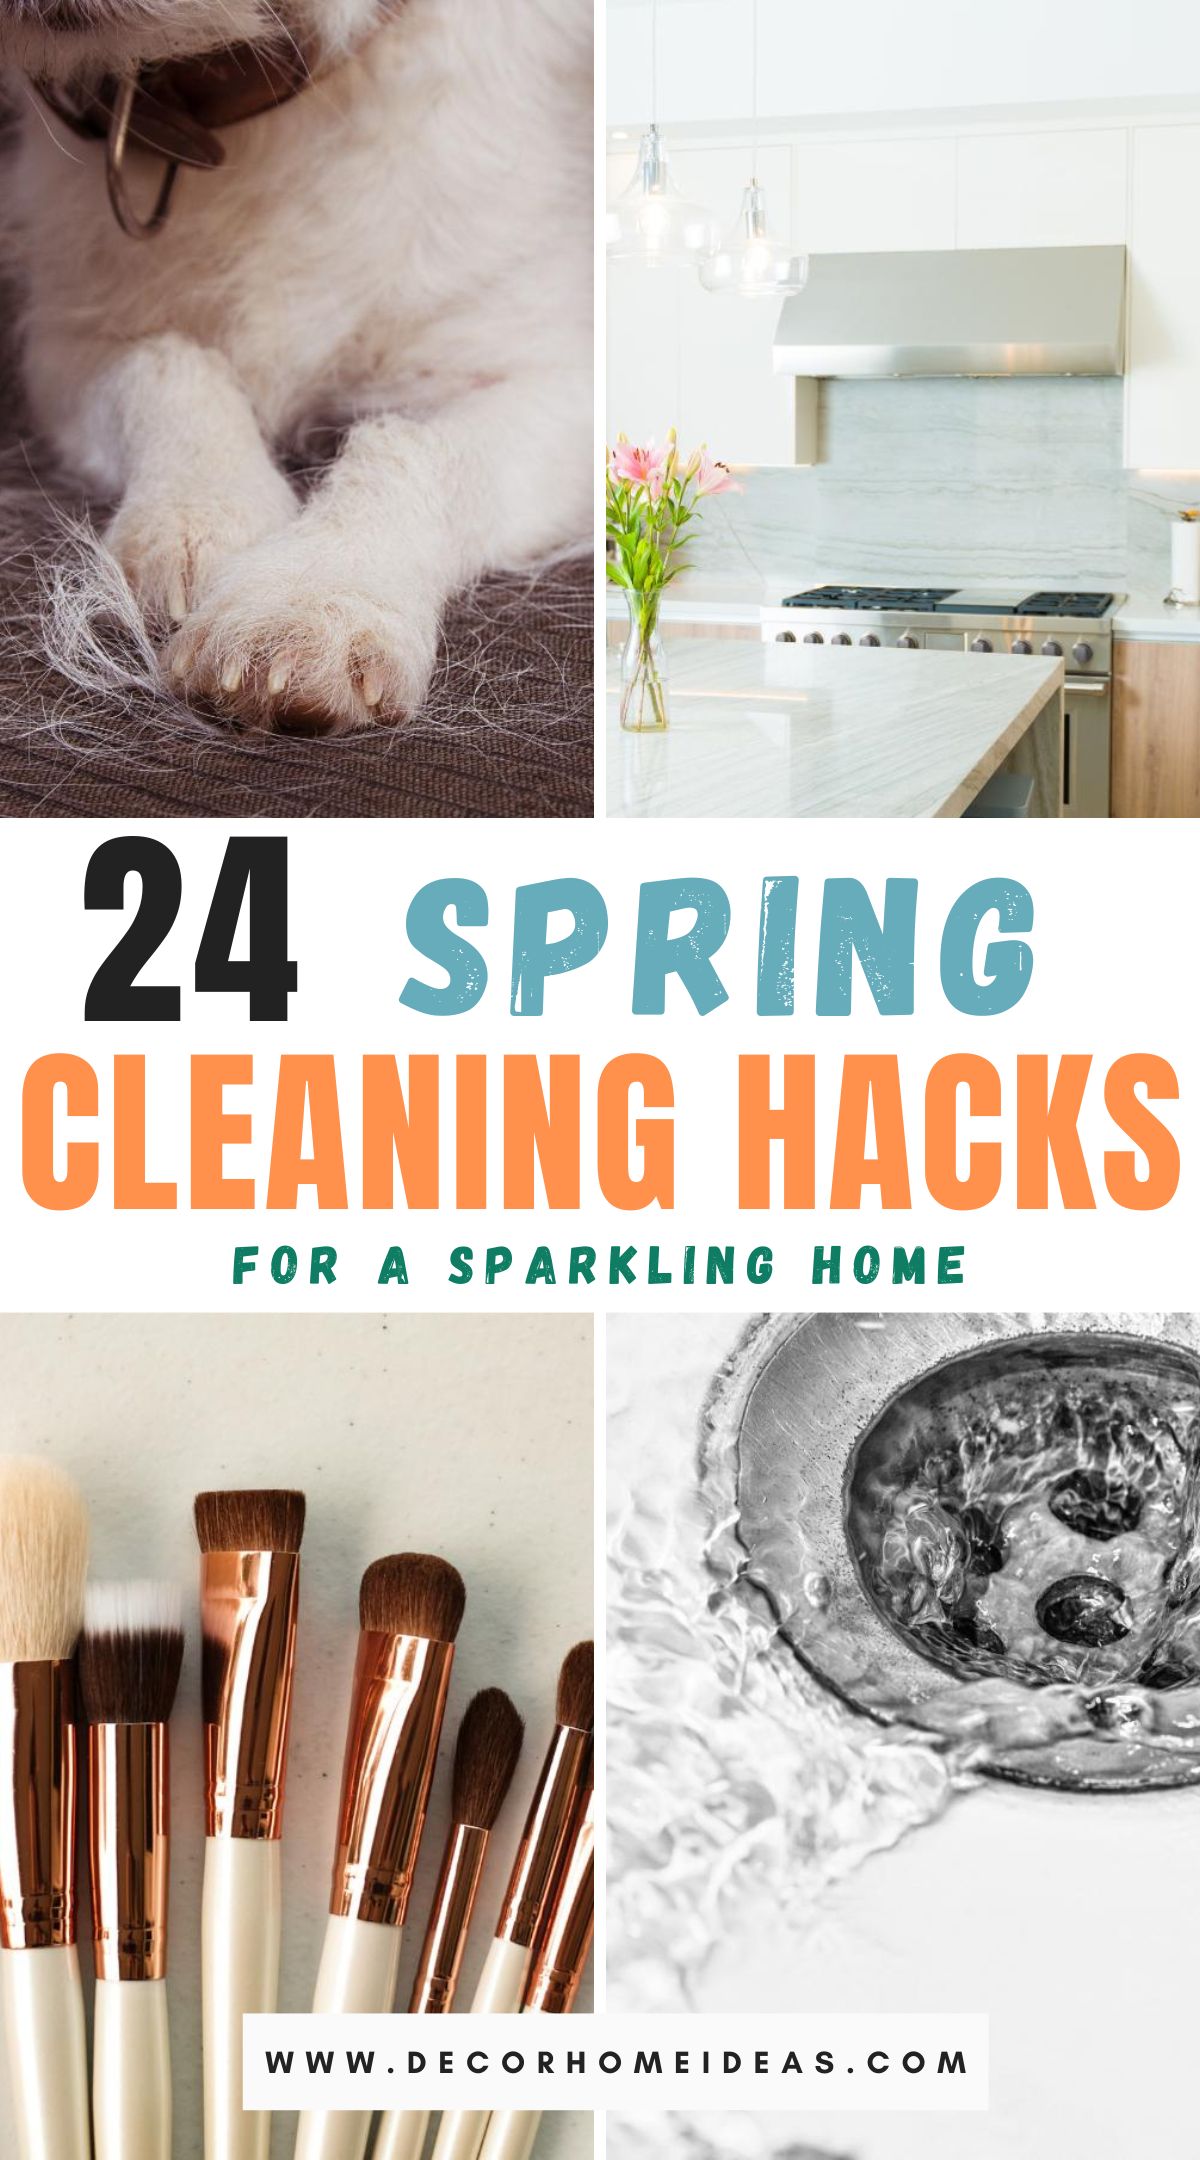 Discover 26 ingenious spring cleaning hacks to revitalize your home effortlessly. From tackling tough stains to maximizing organization, these tips ensure your space sparkles with freshness.